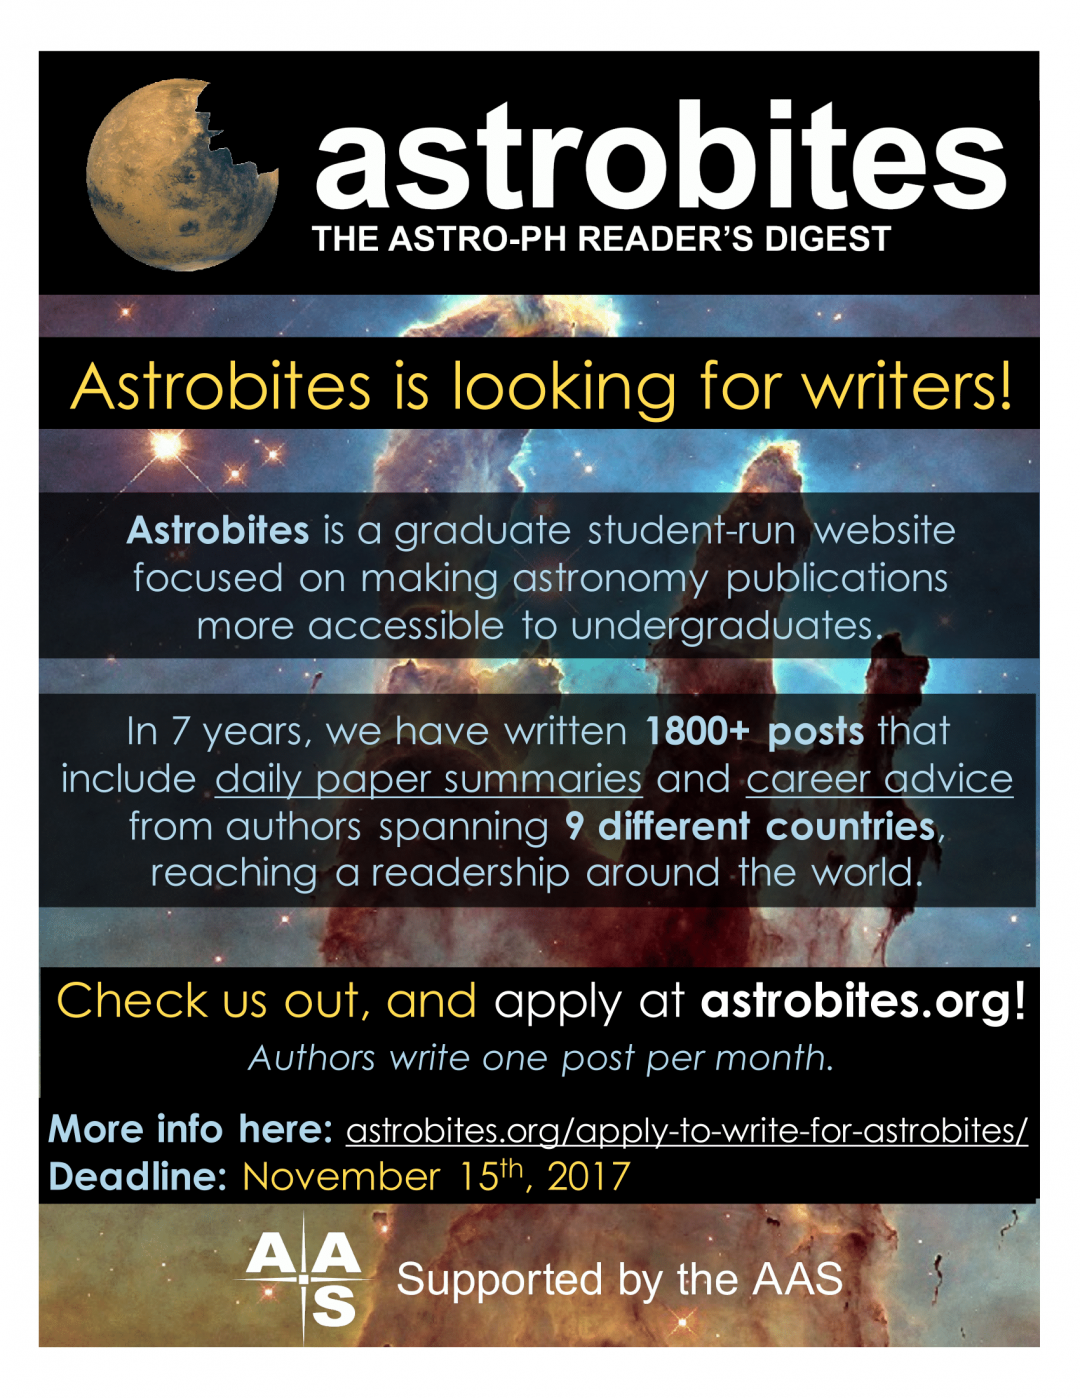 Two Weeks Left to Apply to Write for Astrobites | astrobites